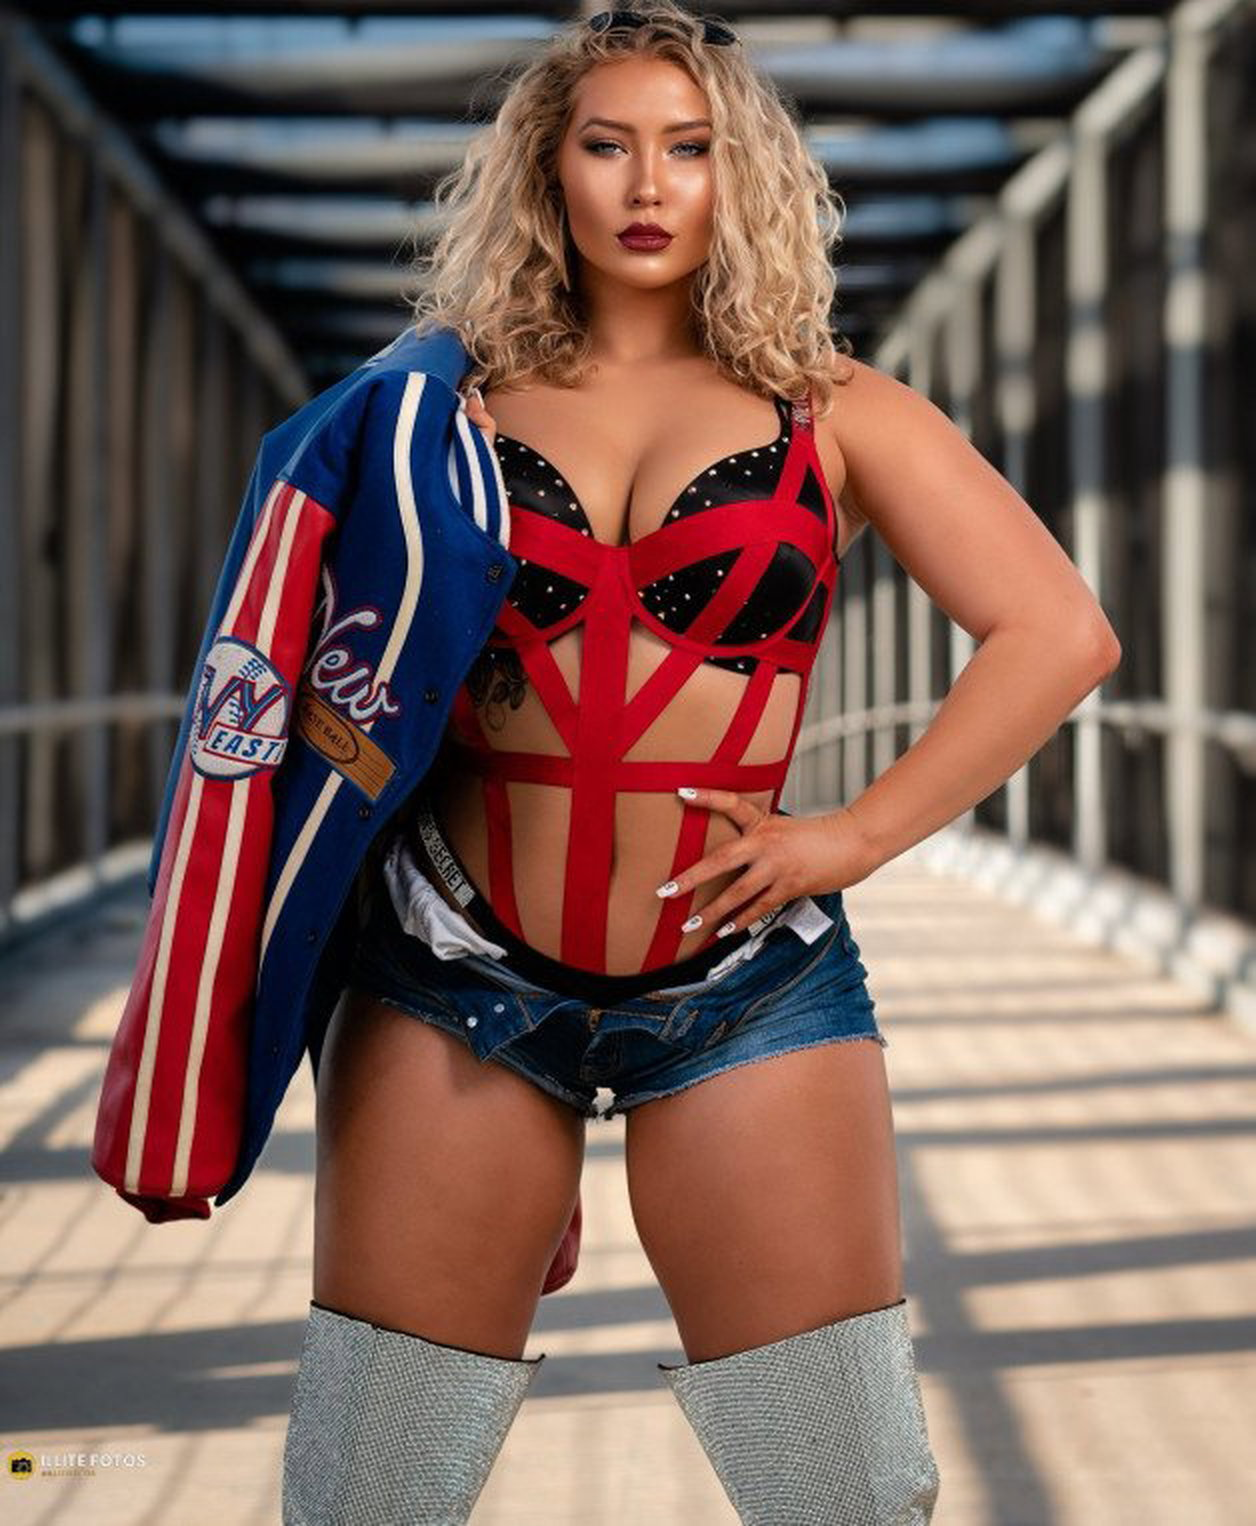 Photo by Ruinedcarpet with the username @Ruinedcarpet,  September 14, 2022 at 8:36 AM. The post is about the topic Women of wrestling and the text says 'Nikkita Lyons.

#NikkitaLyons #Hot #Thick #Cute #Blonde #ProWrestler #Goddess #Amazon #Model #TotalBabe #CurlyHair #Beauty #Thighs #Underwear #Possing #Outdoors #Shorts #Jeans #Makeup #Pretty #WifeMaterial #Hottie #Thickness #Cutie #Modeling #Photoshoot..'